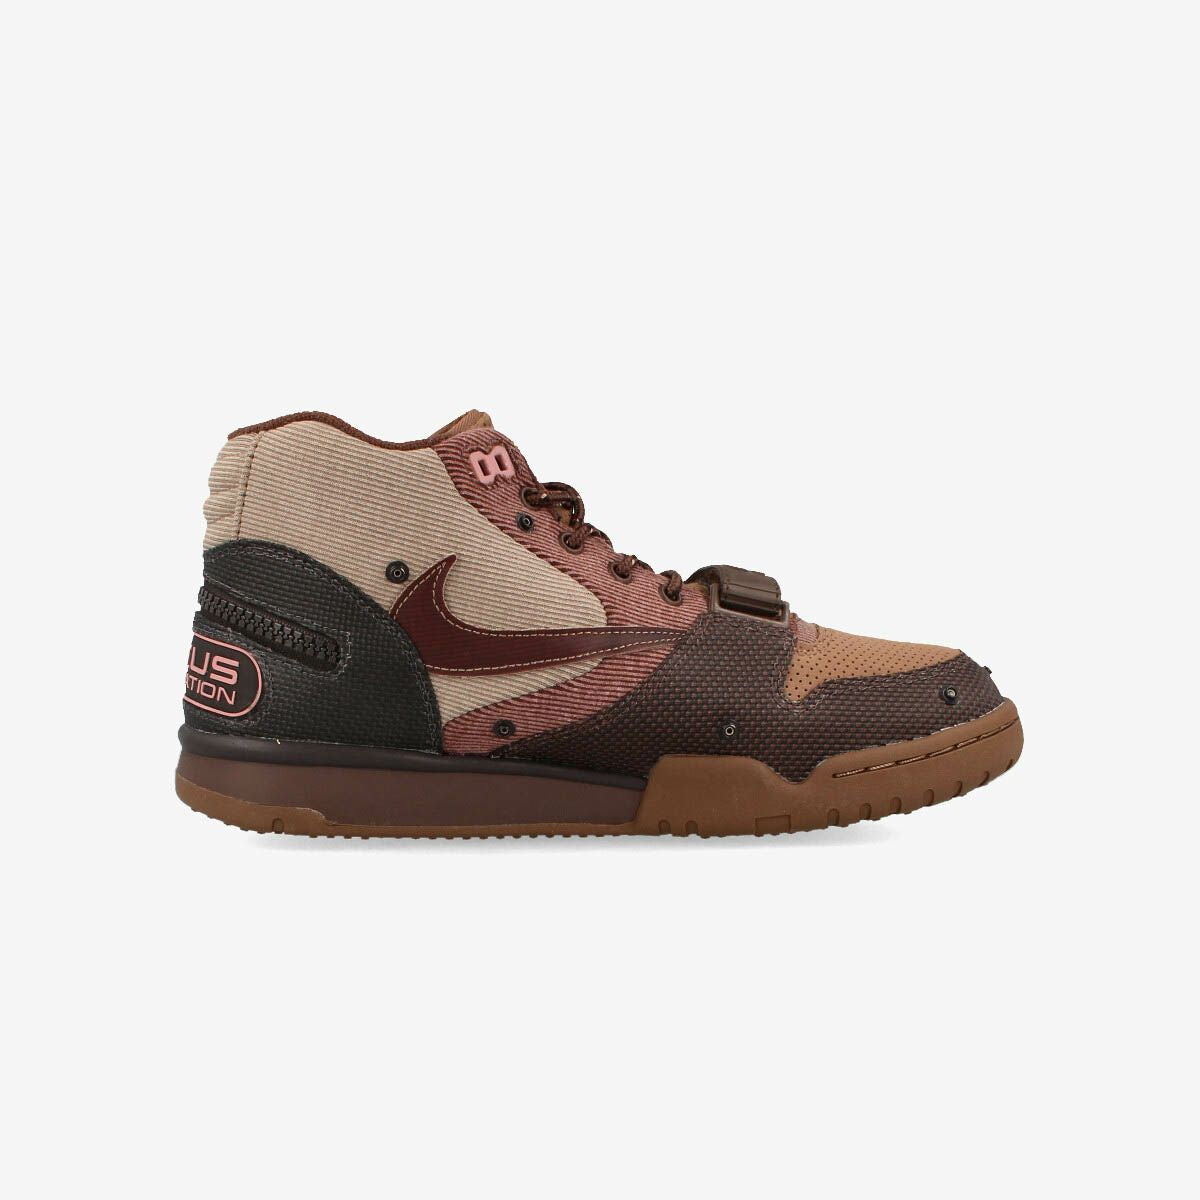 NIKE AIR TRAINER 1 X CACT.US CORP LIGHT CHOCOLATE/RUST PINK